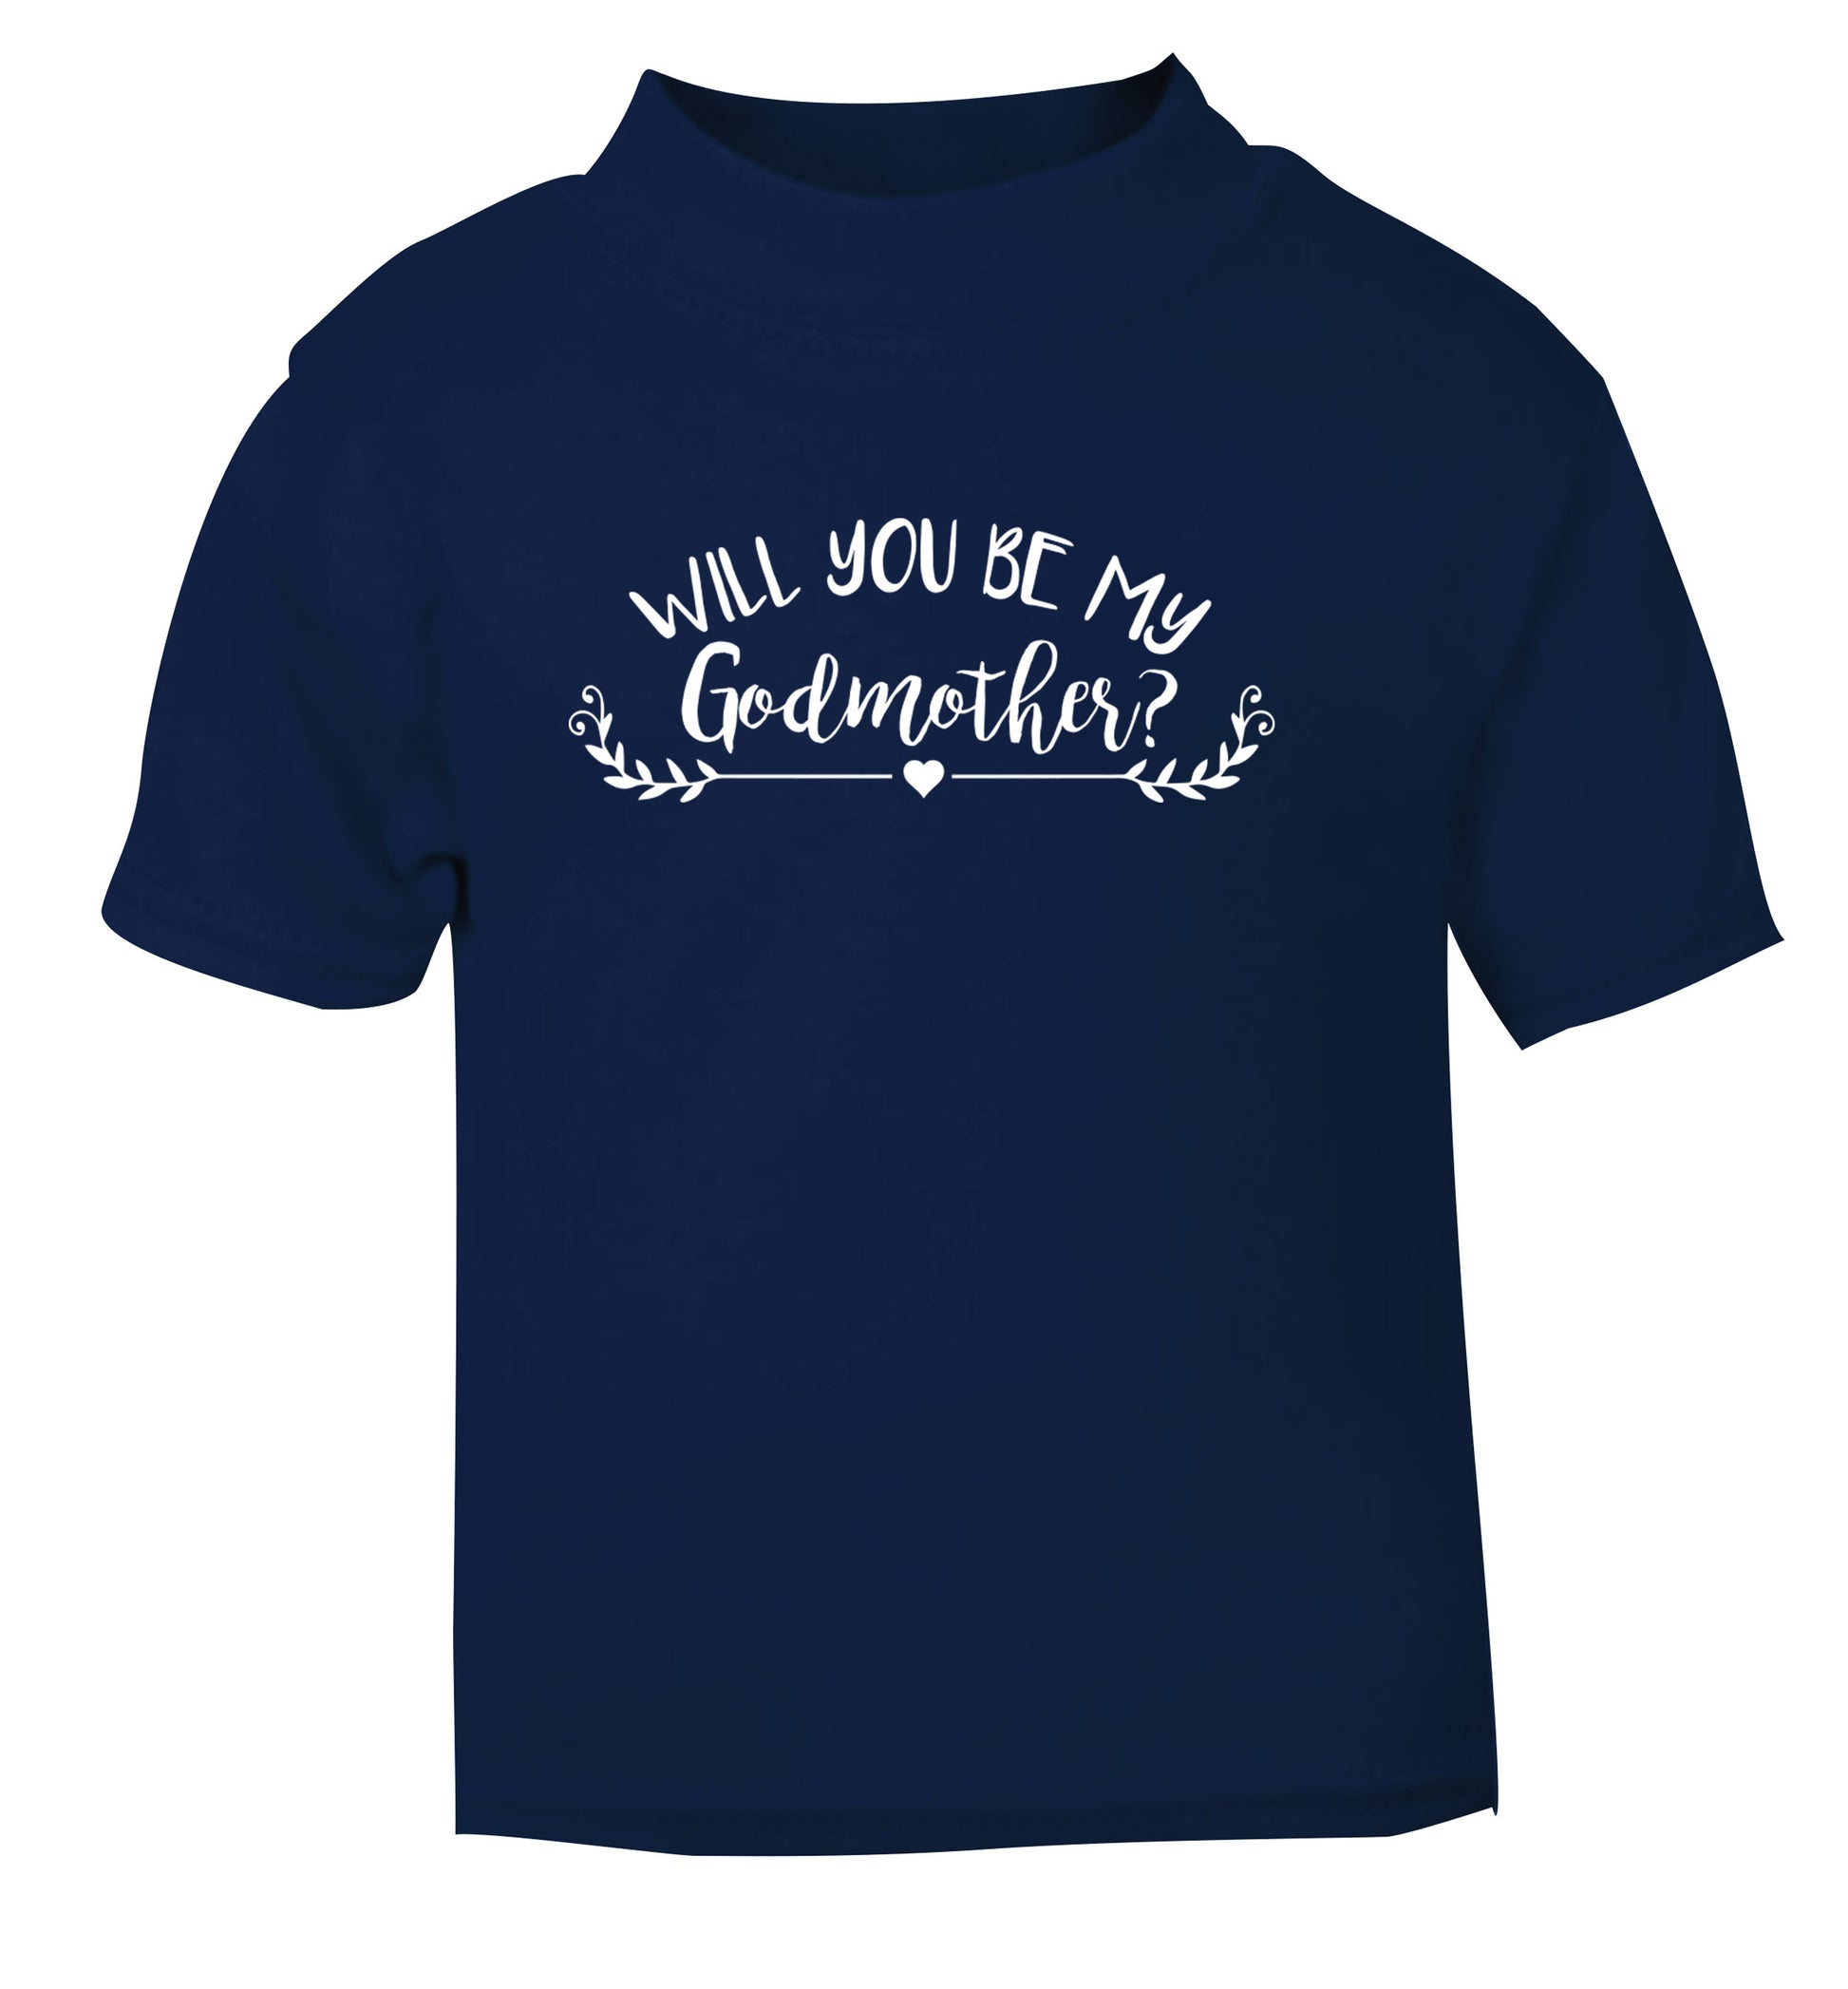 Will you be my godmother? navy Baby Toddler Tshirt 2 Years